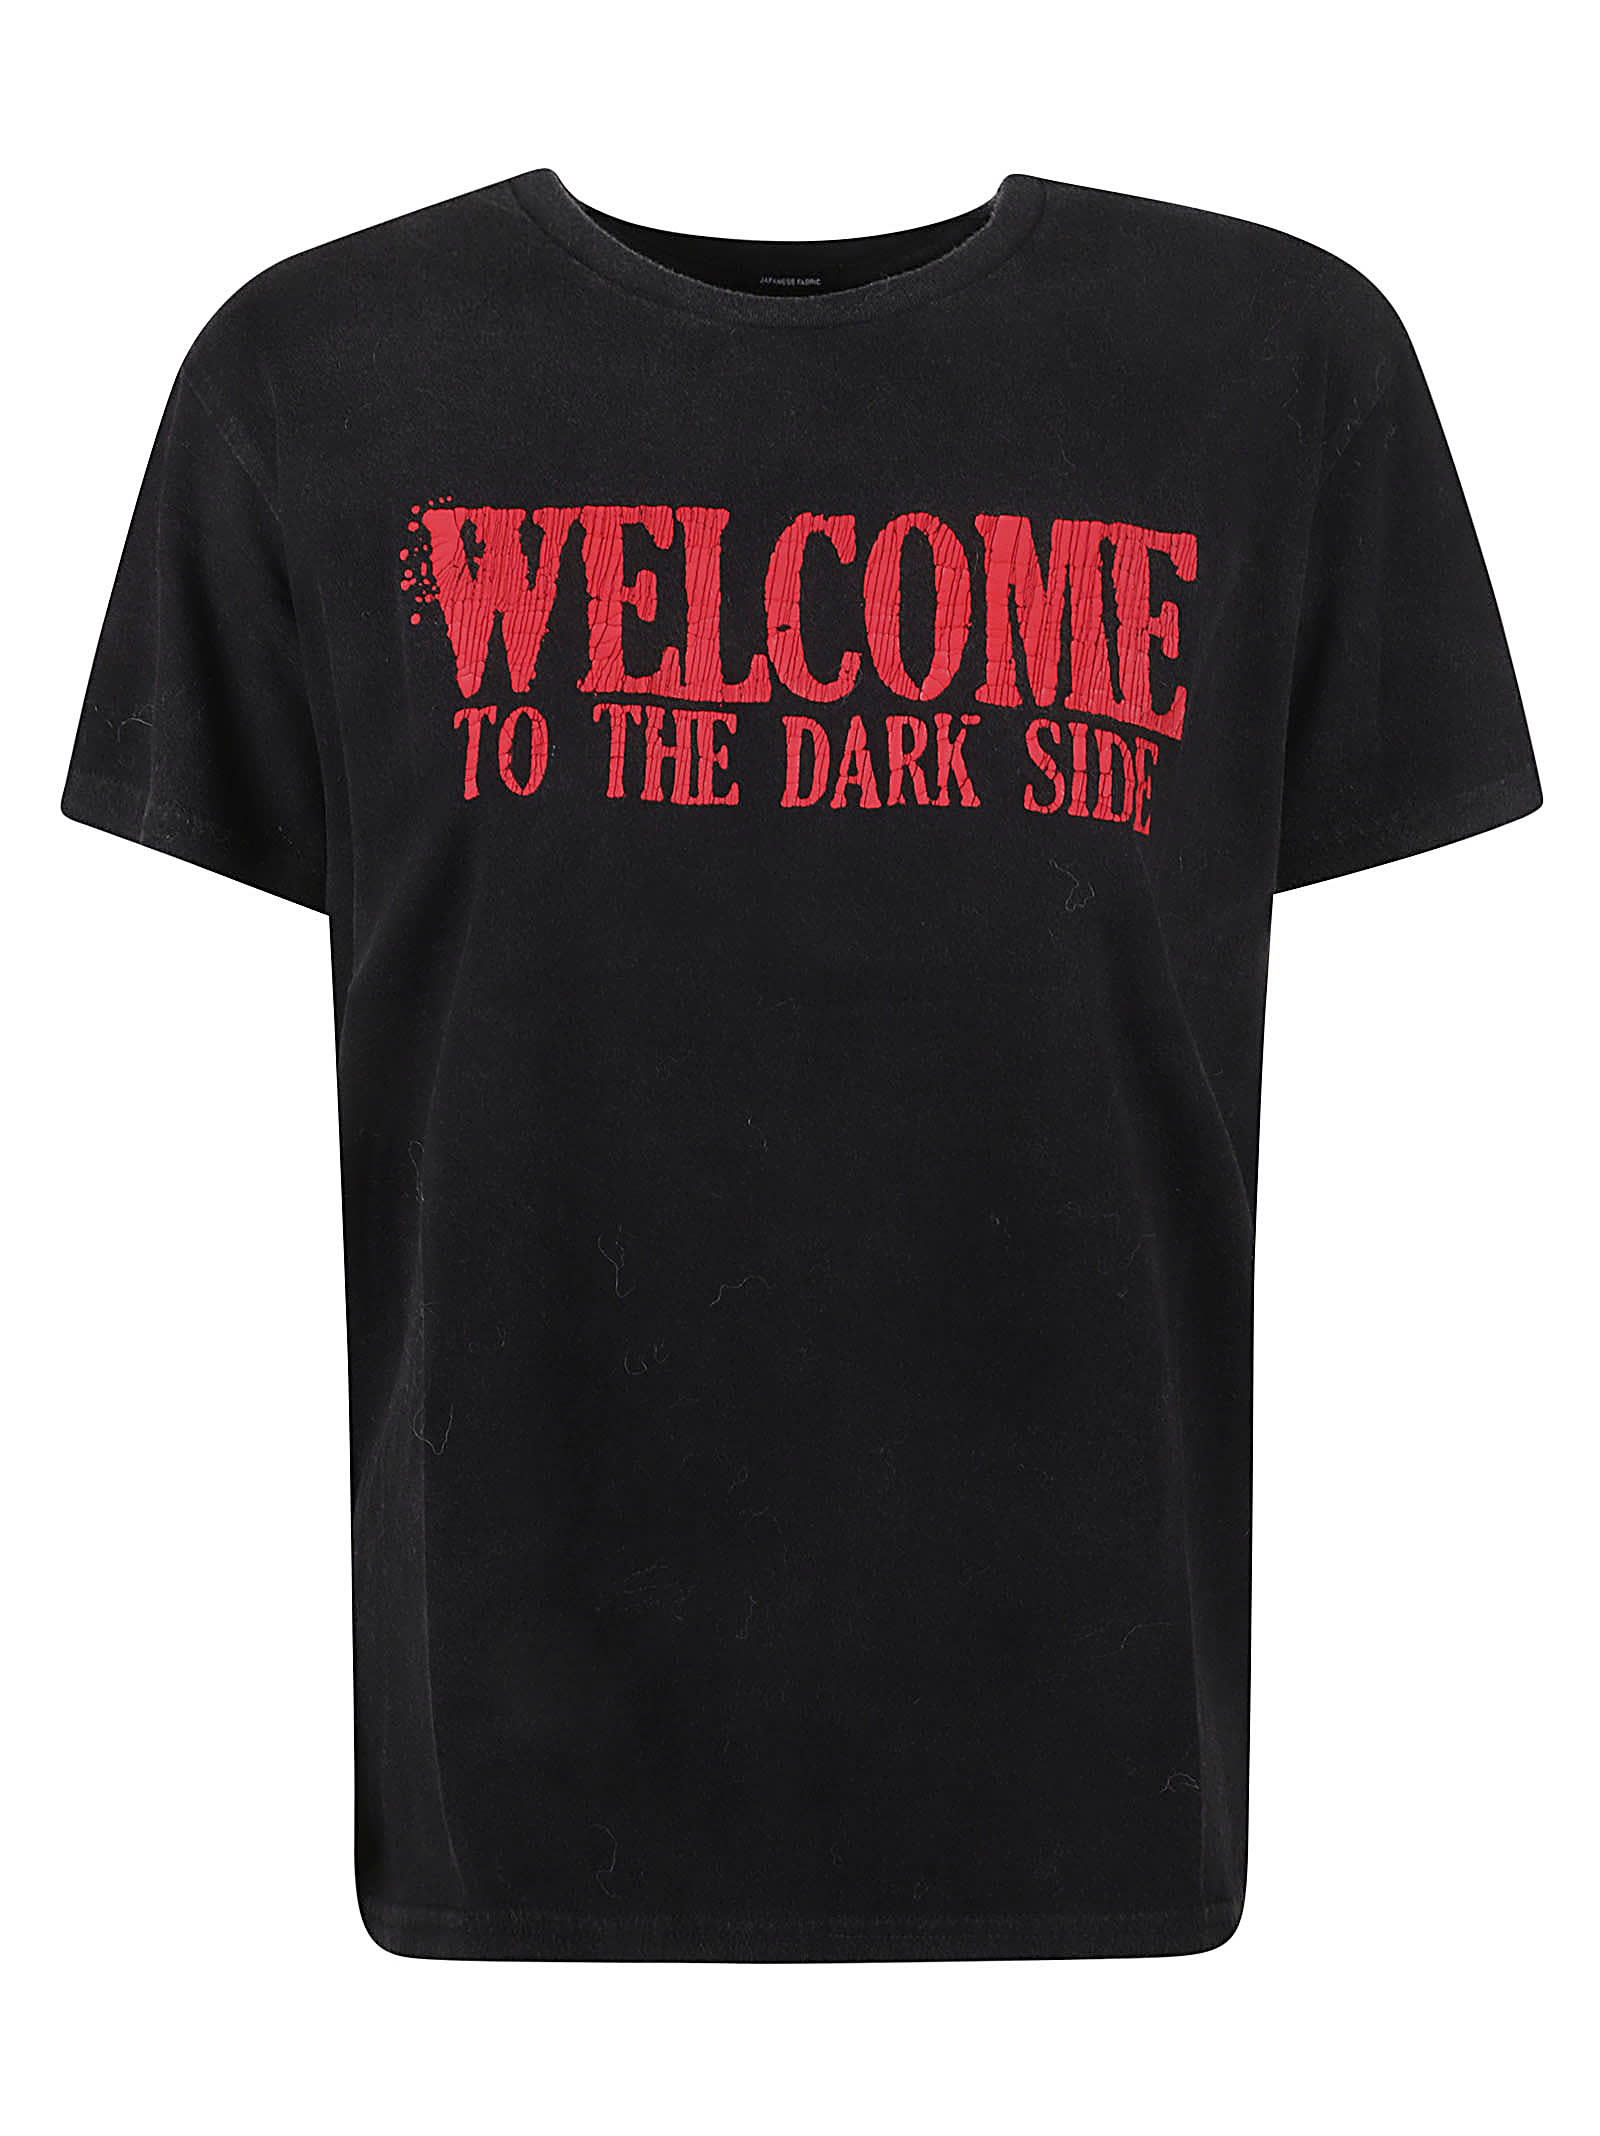 R13 WELCOME TO THE DARK SIDE BOY T-SHIRT